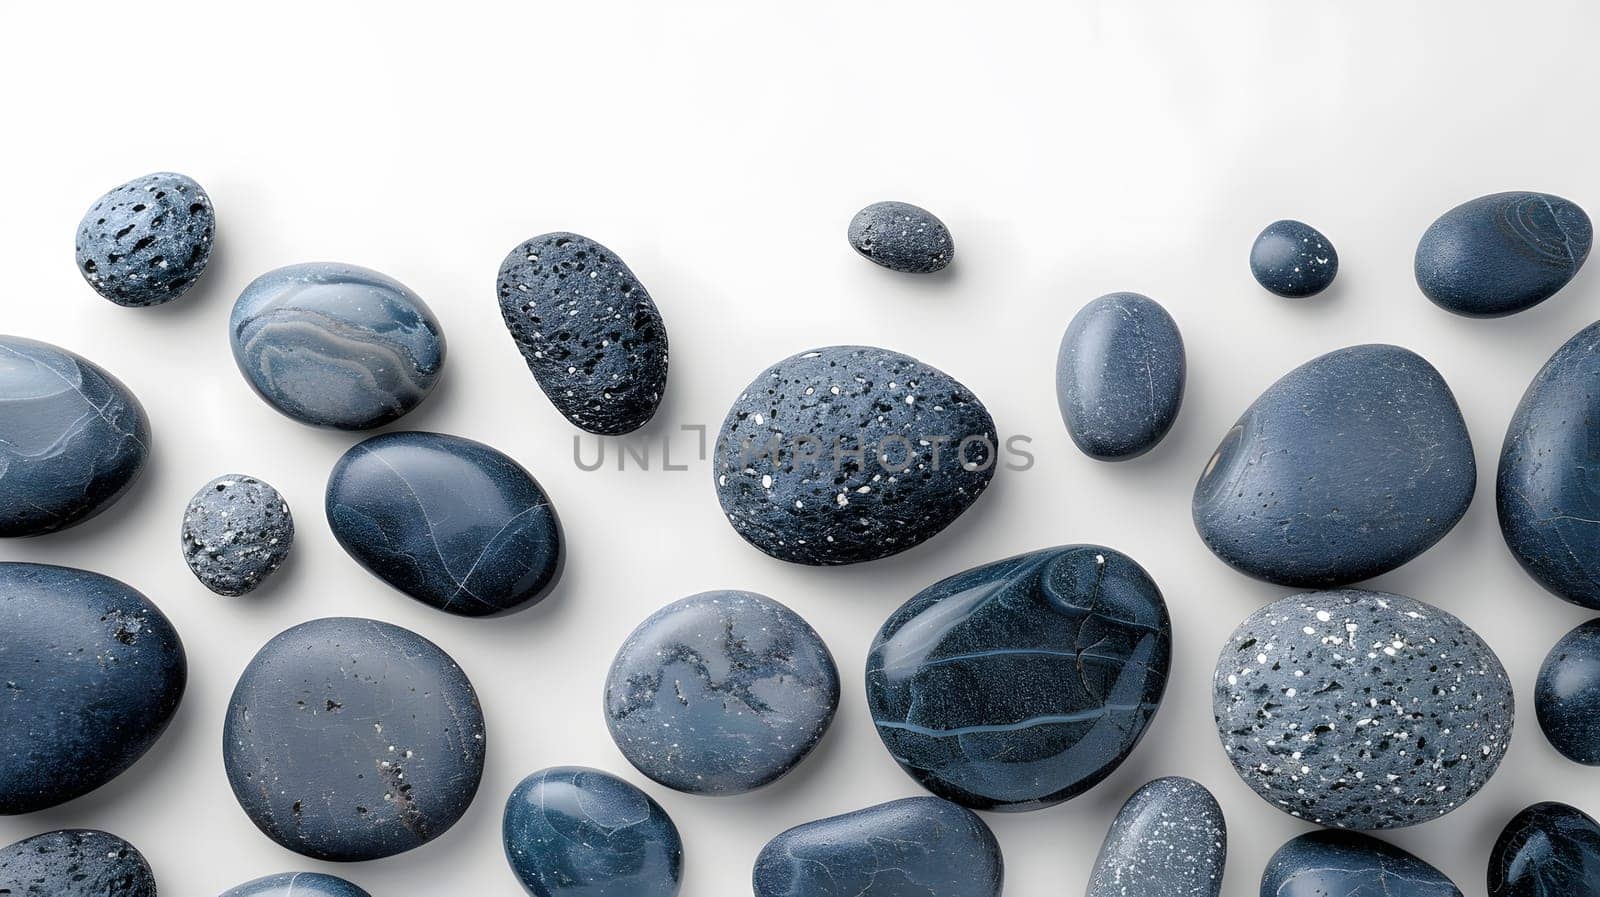 A cluster of black rocks on a white surface, arranged in a circle by Nadtochiy